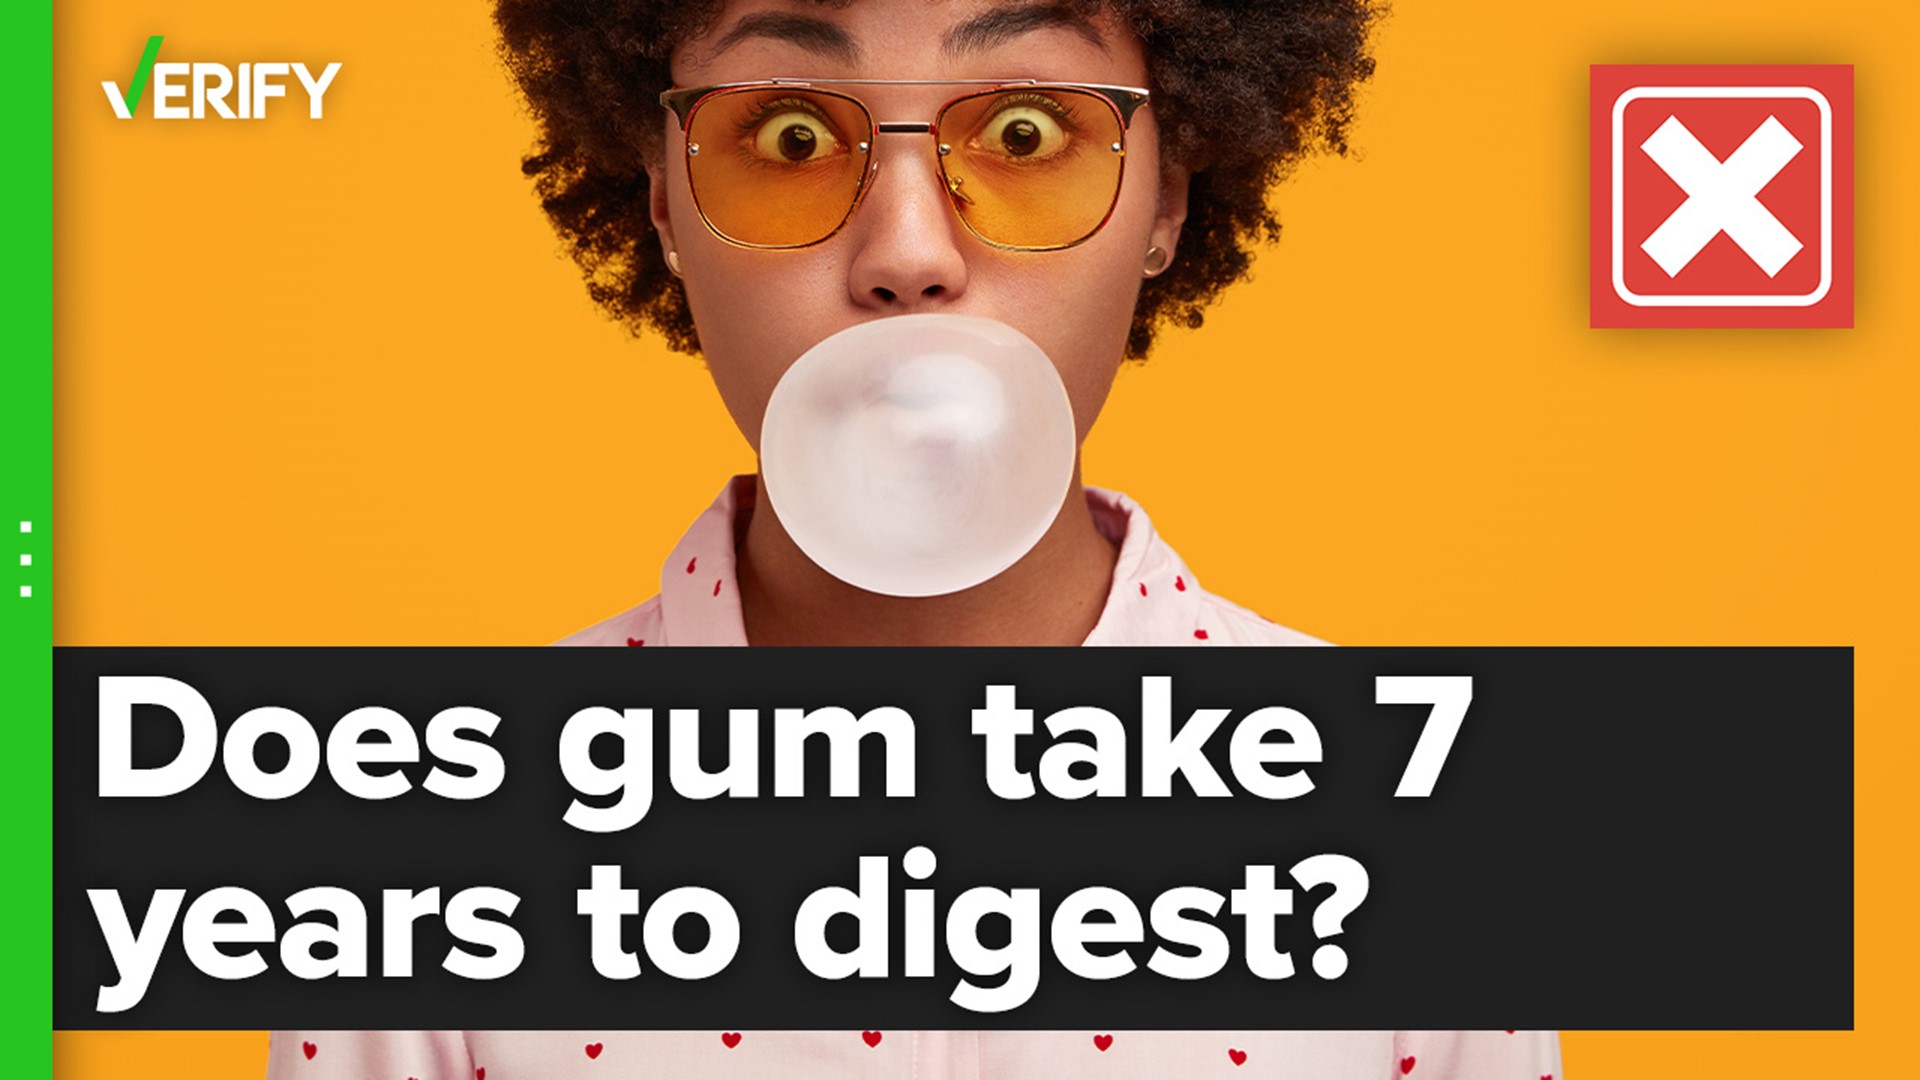 Your body can’t digest gum, but that doesn’t mean it will remain in your body for seven years. It passes through your stool as fast as anything else does.